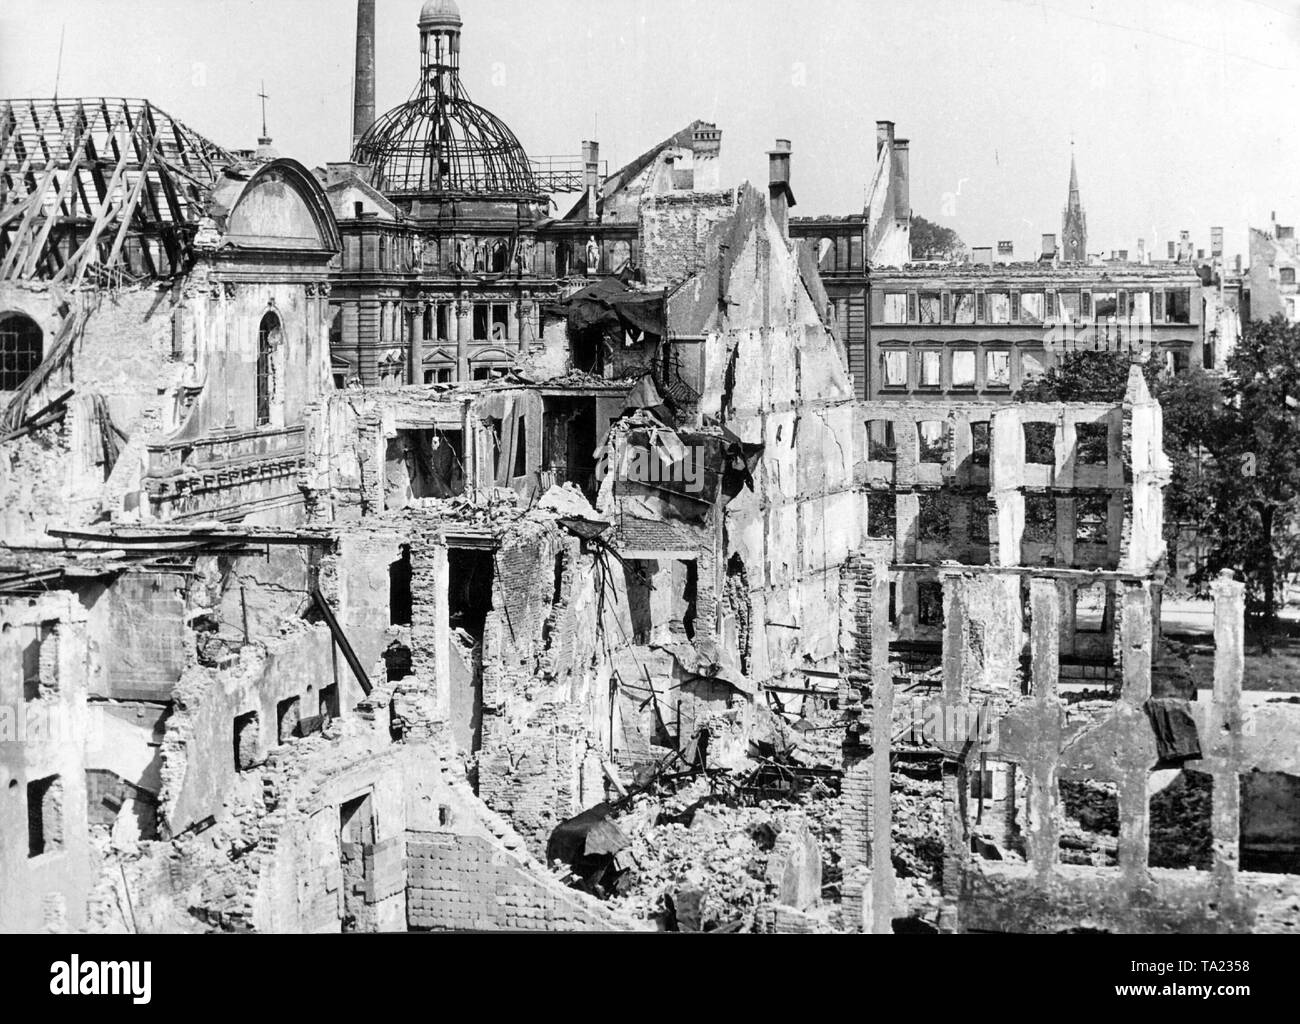 Ruins and debris in the Munich city center after the Second World War, 1945 Stock Photo